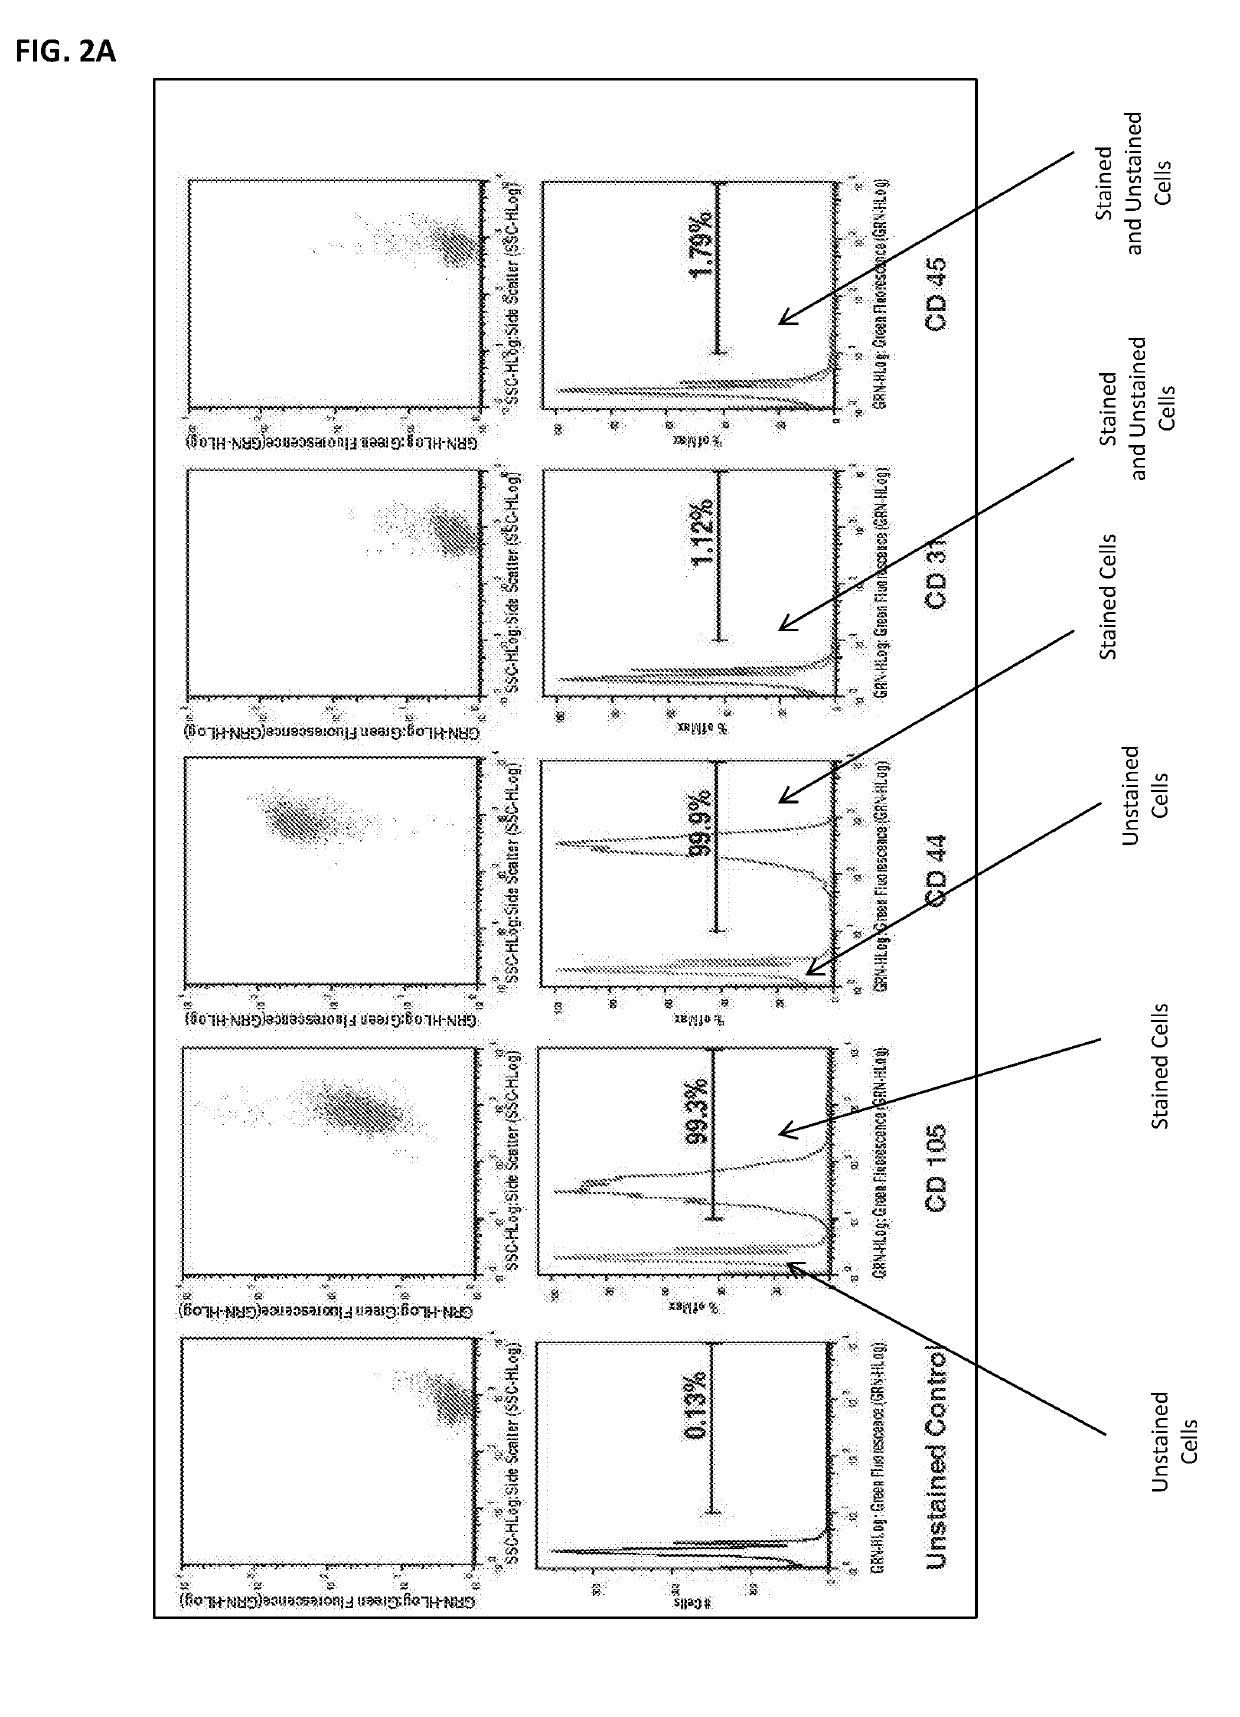 Compositions and methods for the quality control of stem cell preparations